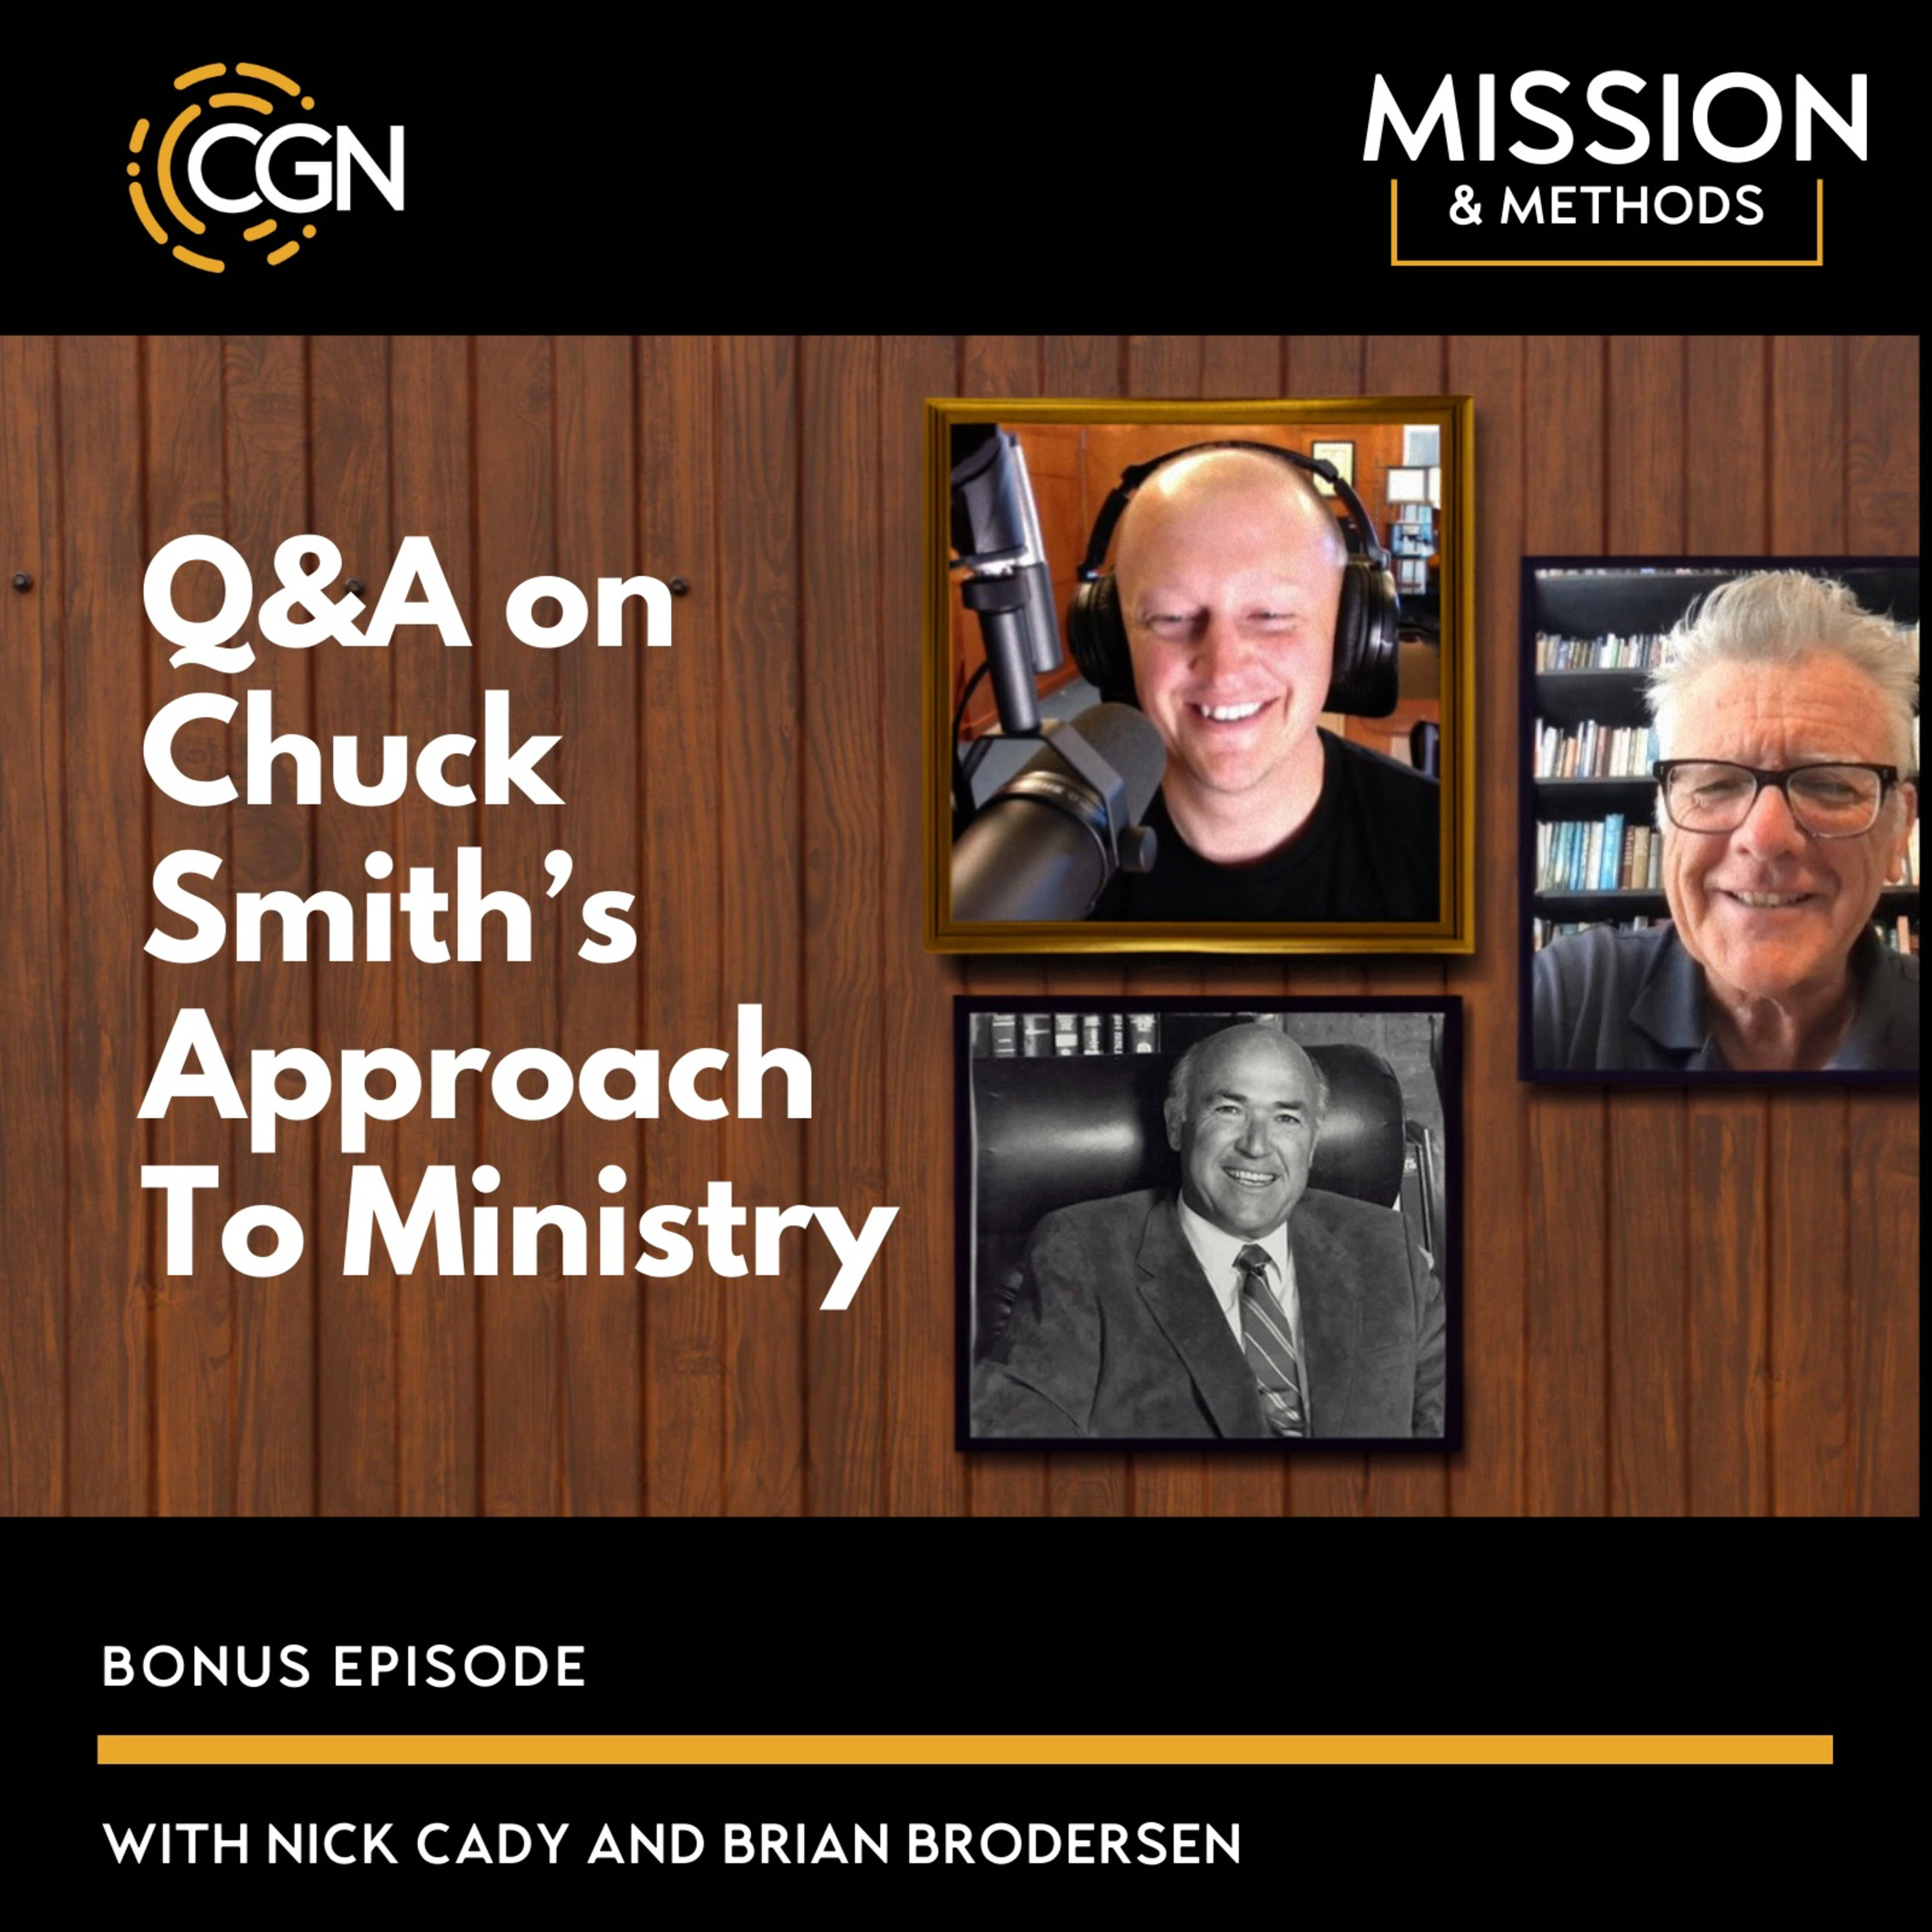 Q&A on Chuck Smith’s Approach to Ministry